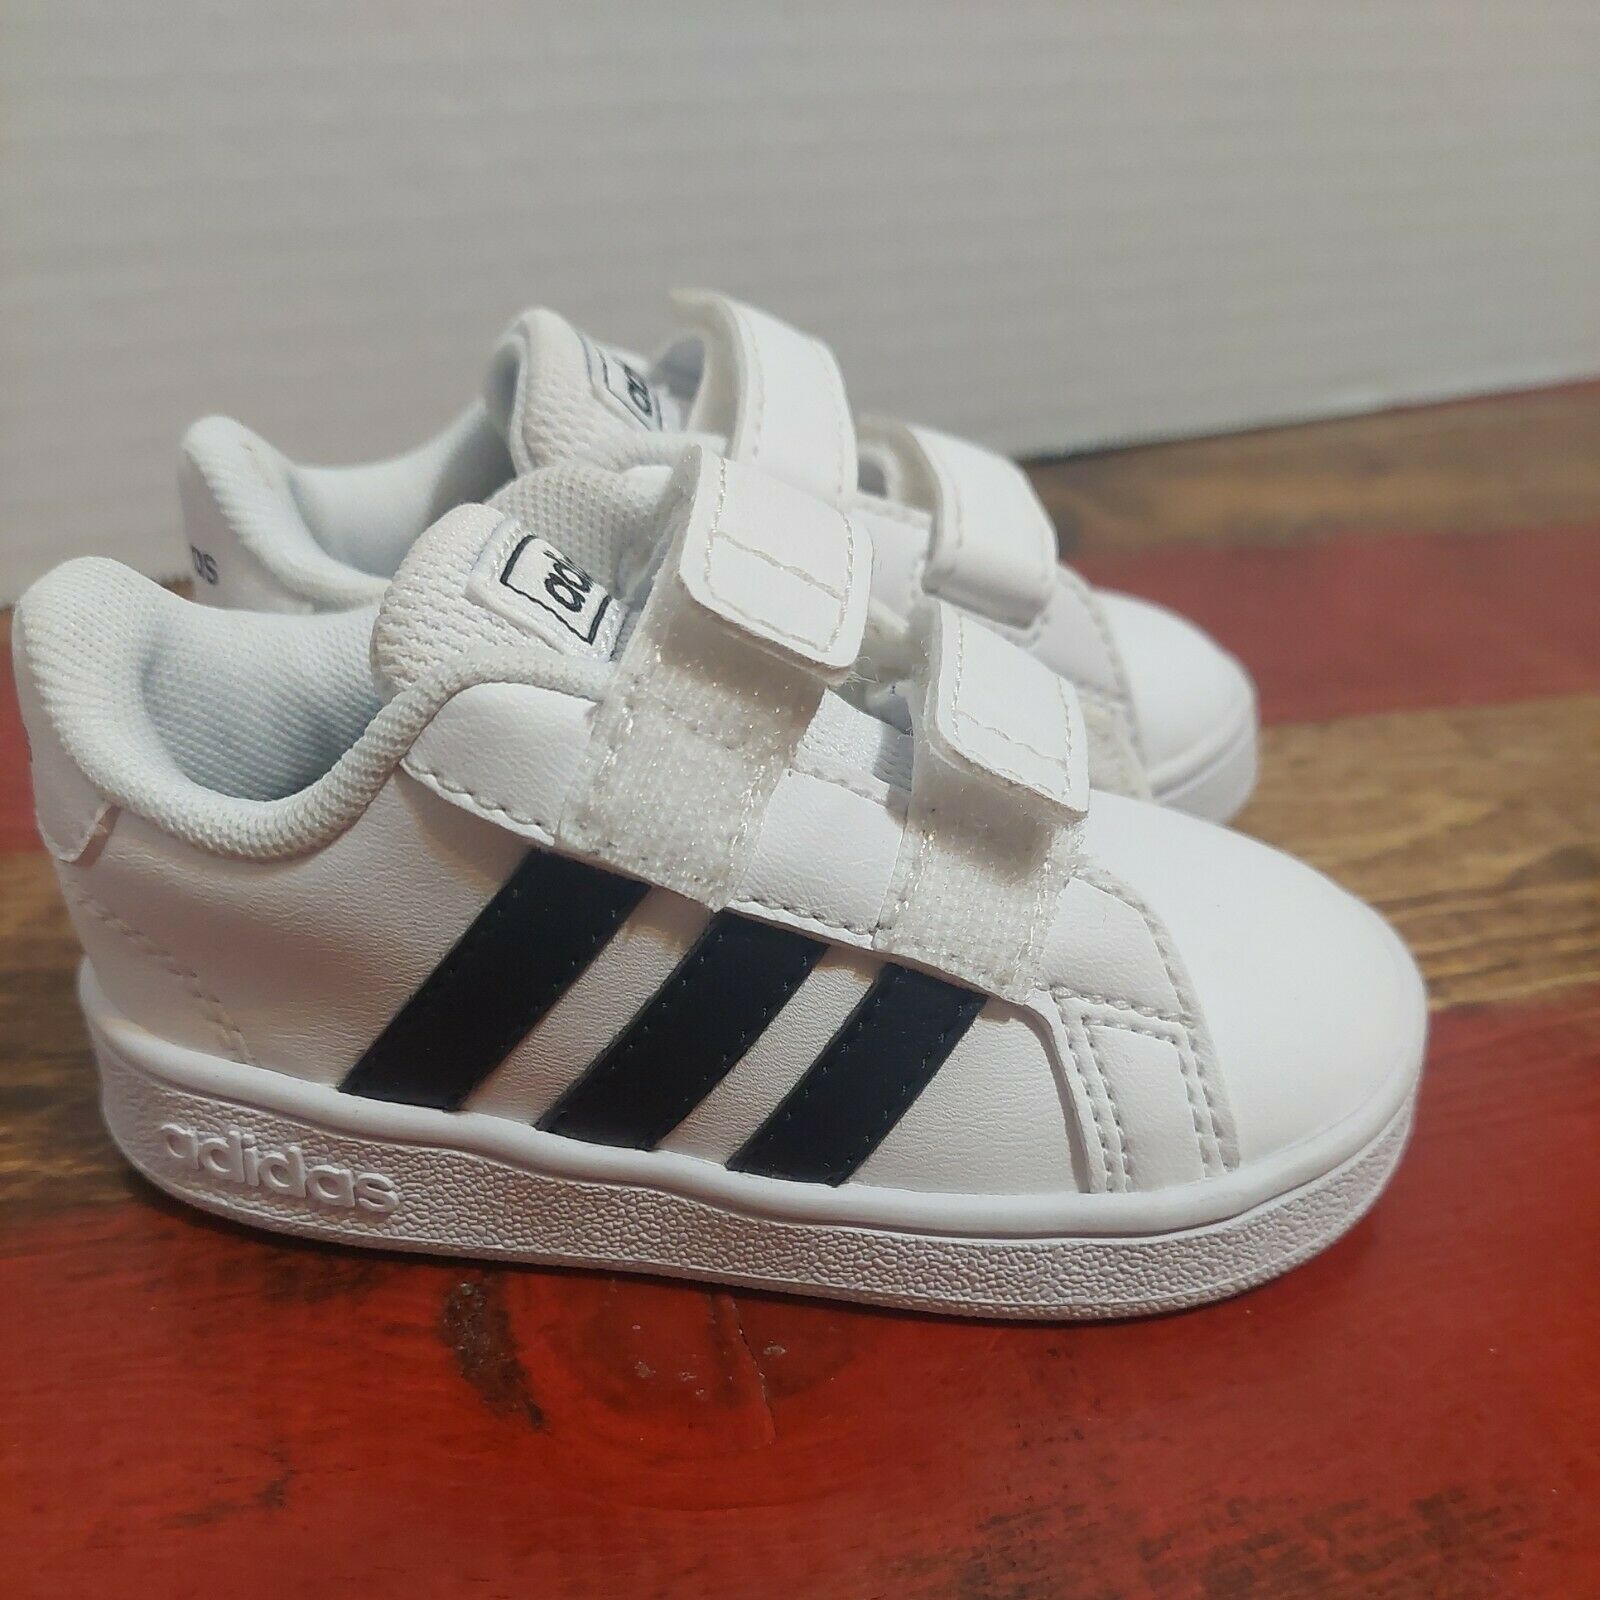 ADIDAS GRAND COURT 2 SNEAKER - TODDLER BABY SHOE WHITE and BLACK Size 5k